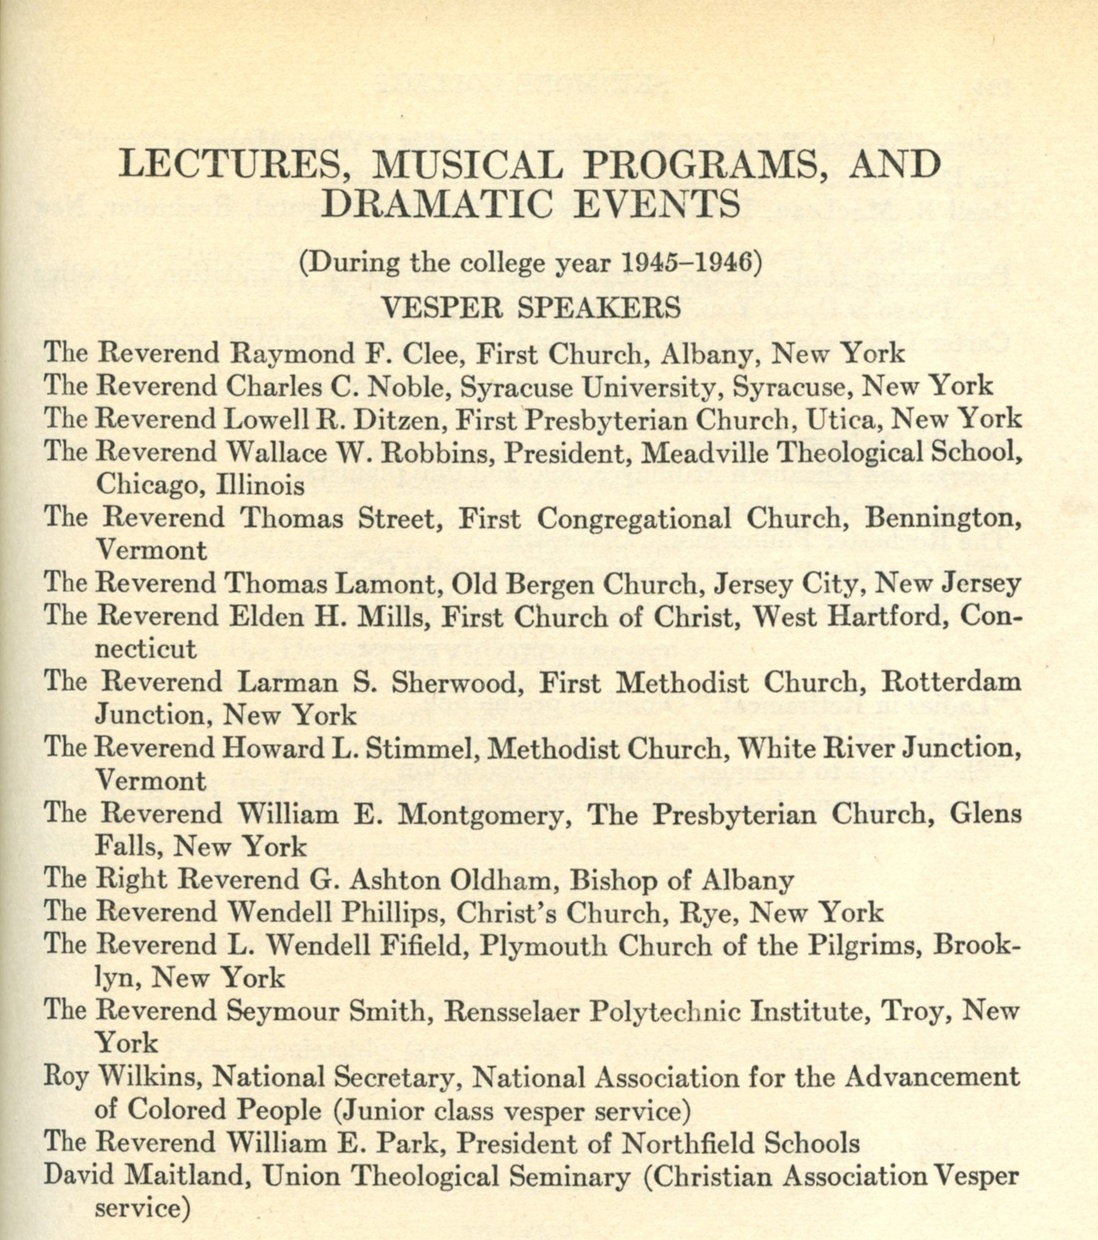 A weathered page has the header “LECTURES, MUSICAL PROGRAMS, AND DRAMATIC EVENTS”, followed by “VESPER SPEAKERS” and a list of names and locations.